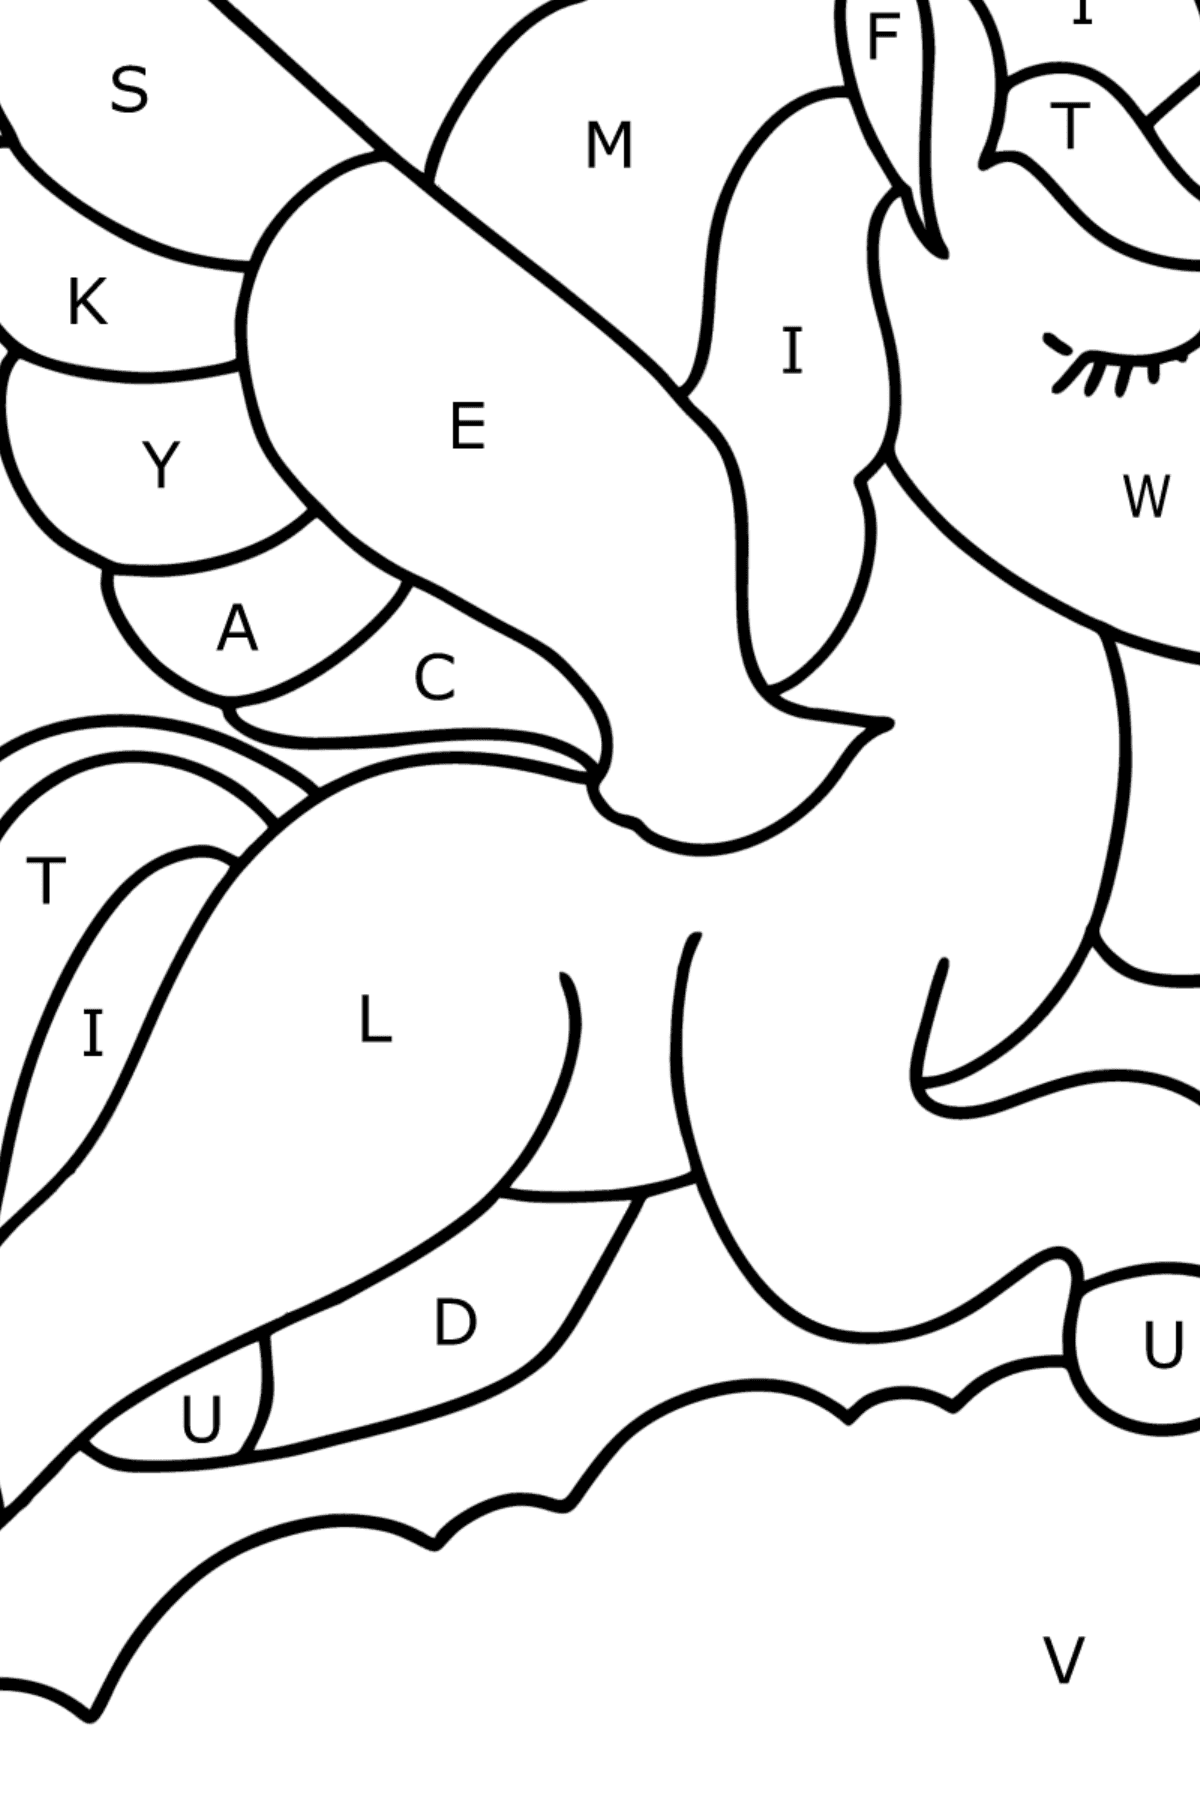 Unicorn with wings coloring page - Coloring by Letters for Kids